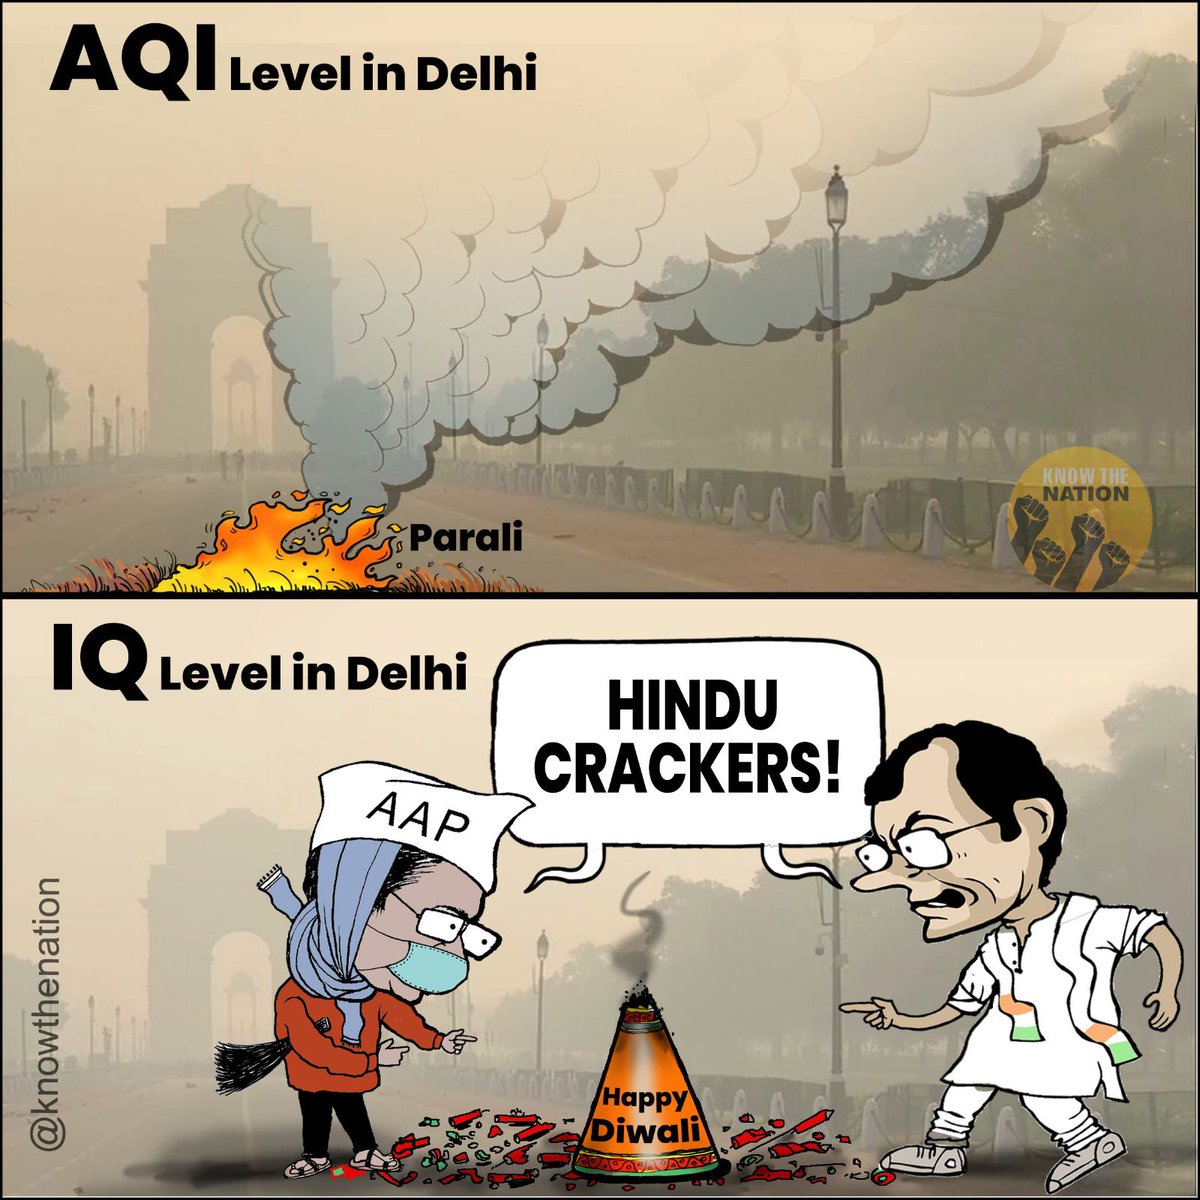 This is ‘Hinduphobia’ in the name of pollution!
#AirPollution #AirQualityIndex #DelhiAirQuality #DelhiAirPollution #Kejriwal #AAPSchoolOfLies